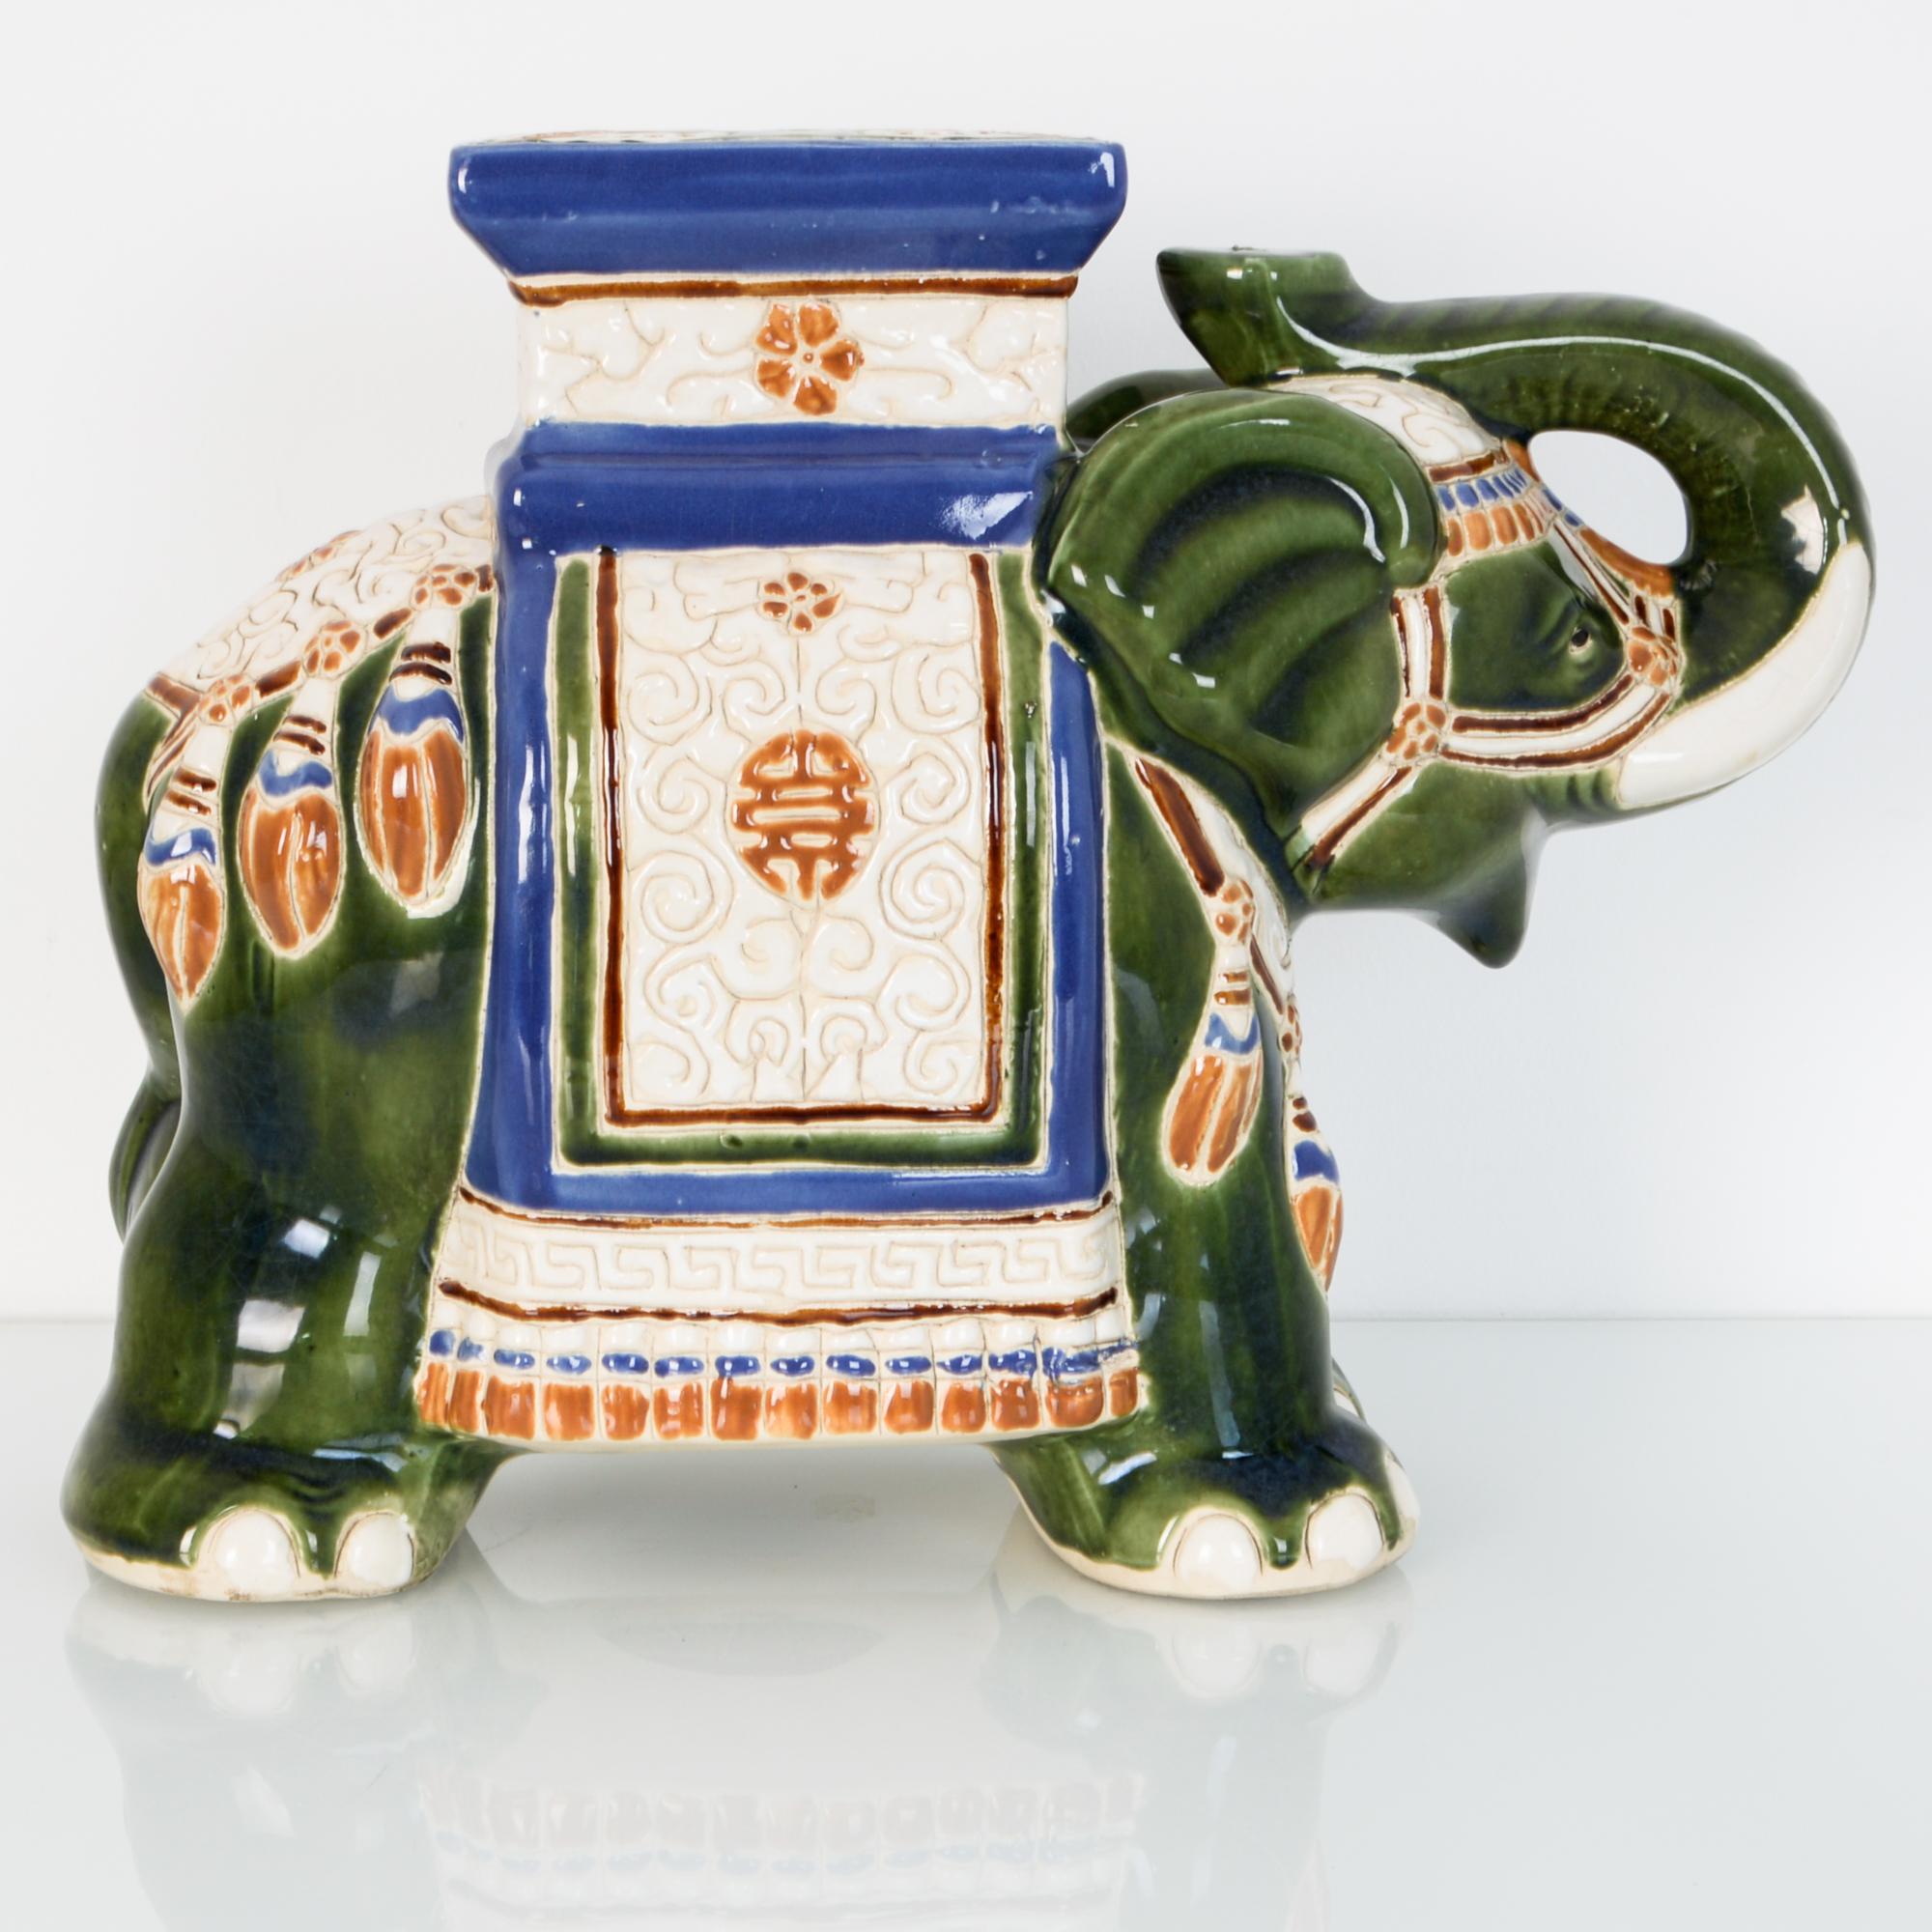 A decorative mid-20th century style, features oriental influenced elephant motif, cast in ceramic. This 17.5” chinoiserie garden stool is glazed in bright white, a versatile decoration or functional seat.